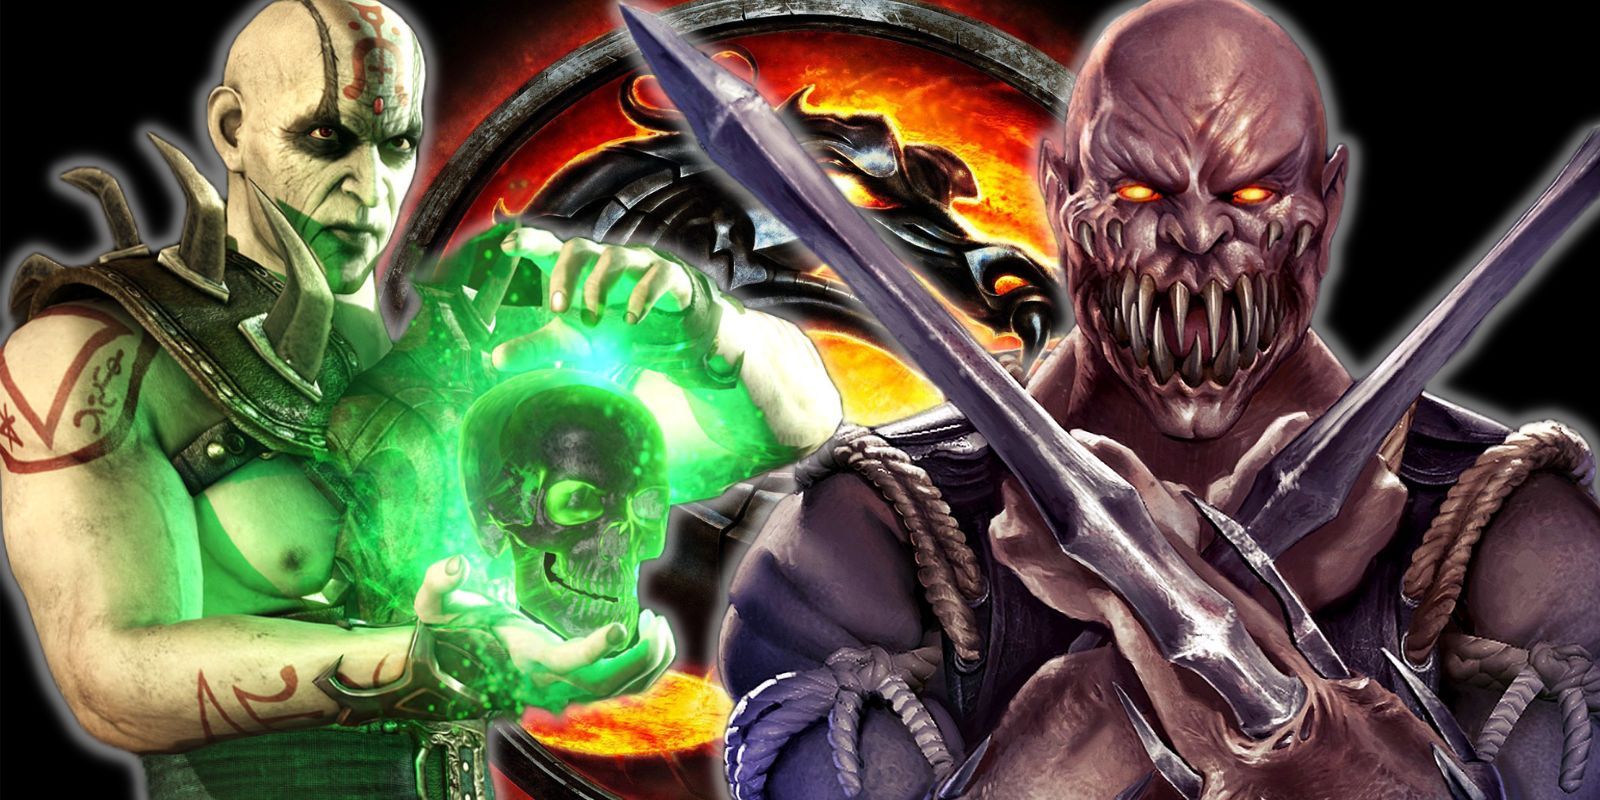 Mortal Kombat 2 Confirms a Fan-Favorite Character for the Live-Action Sequel